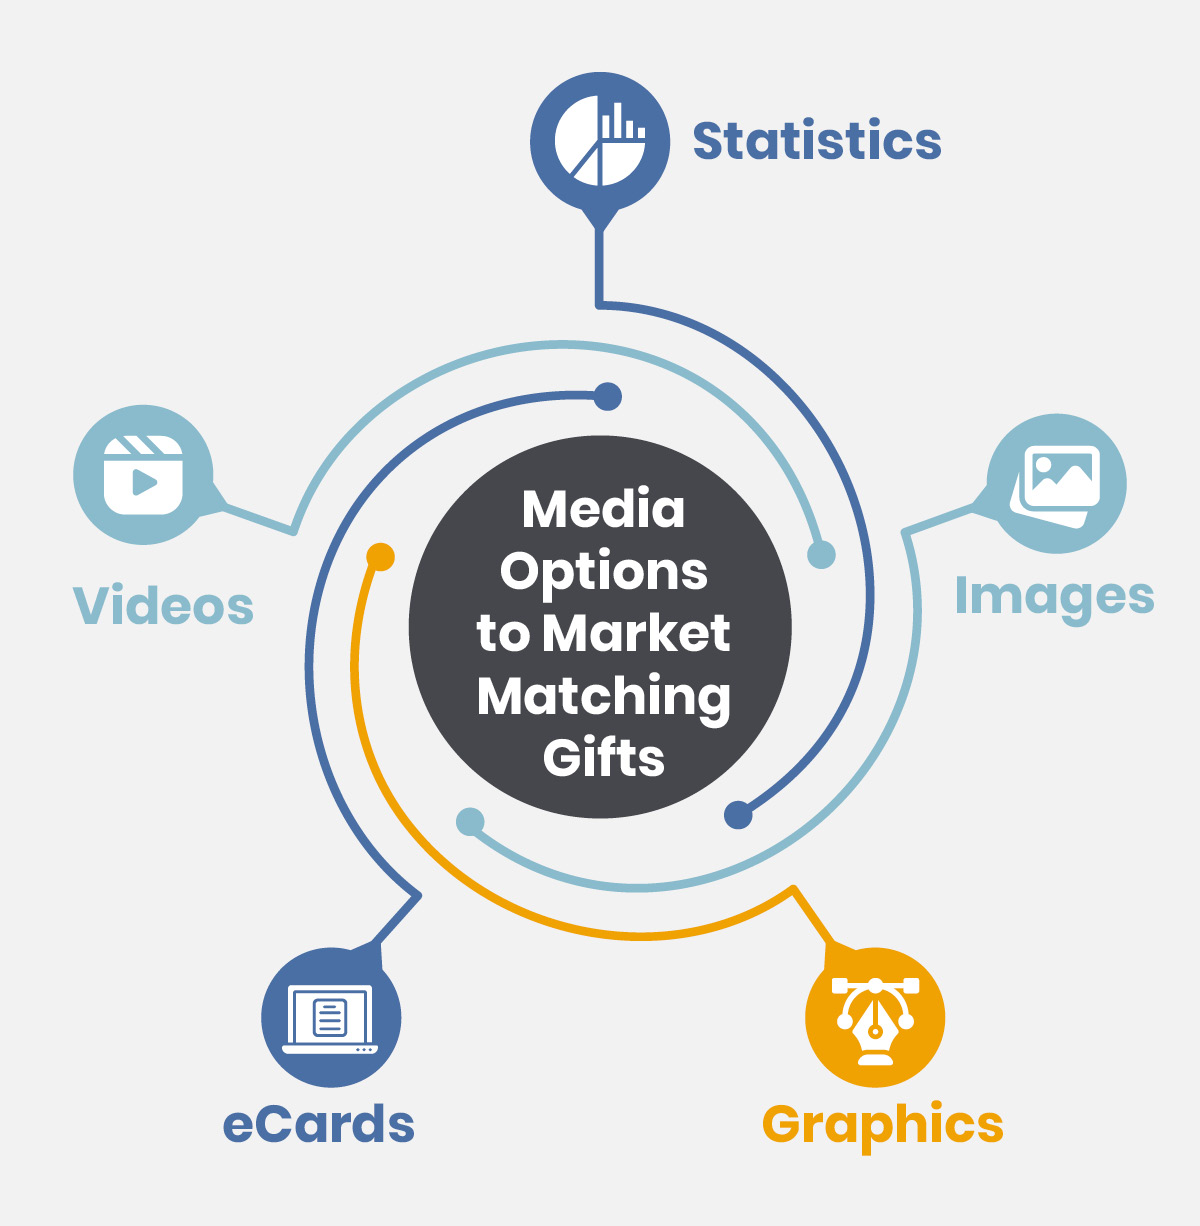 Image shows the different types of media you can use to promote matching gifts, including statistics, images, graphics, eCards, and videos.